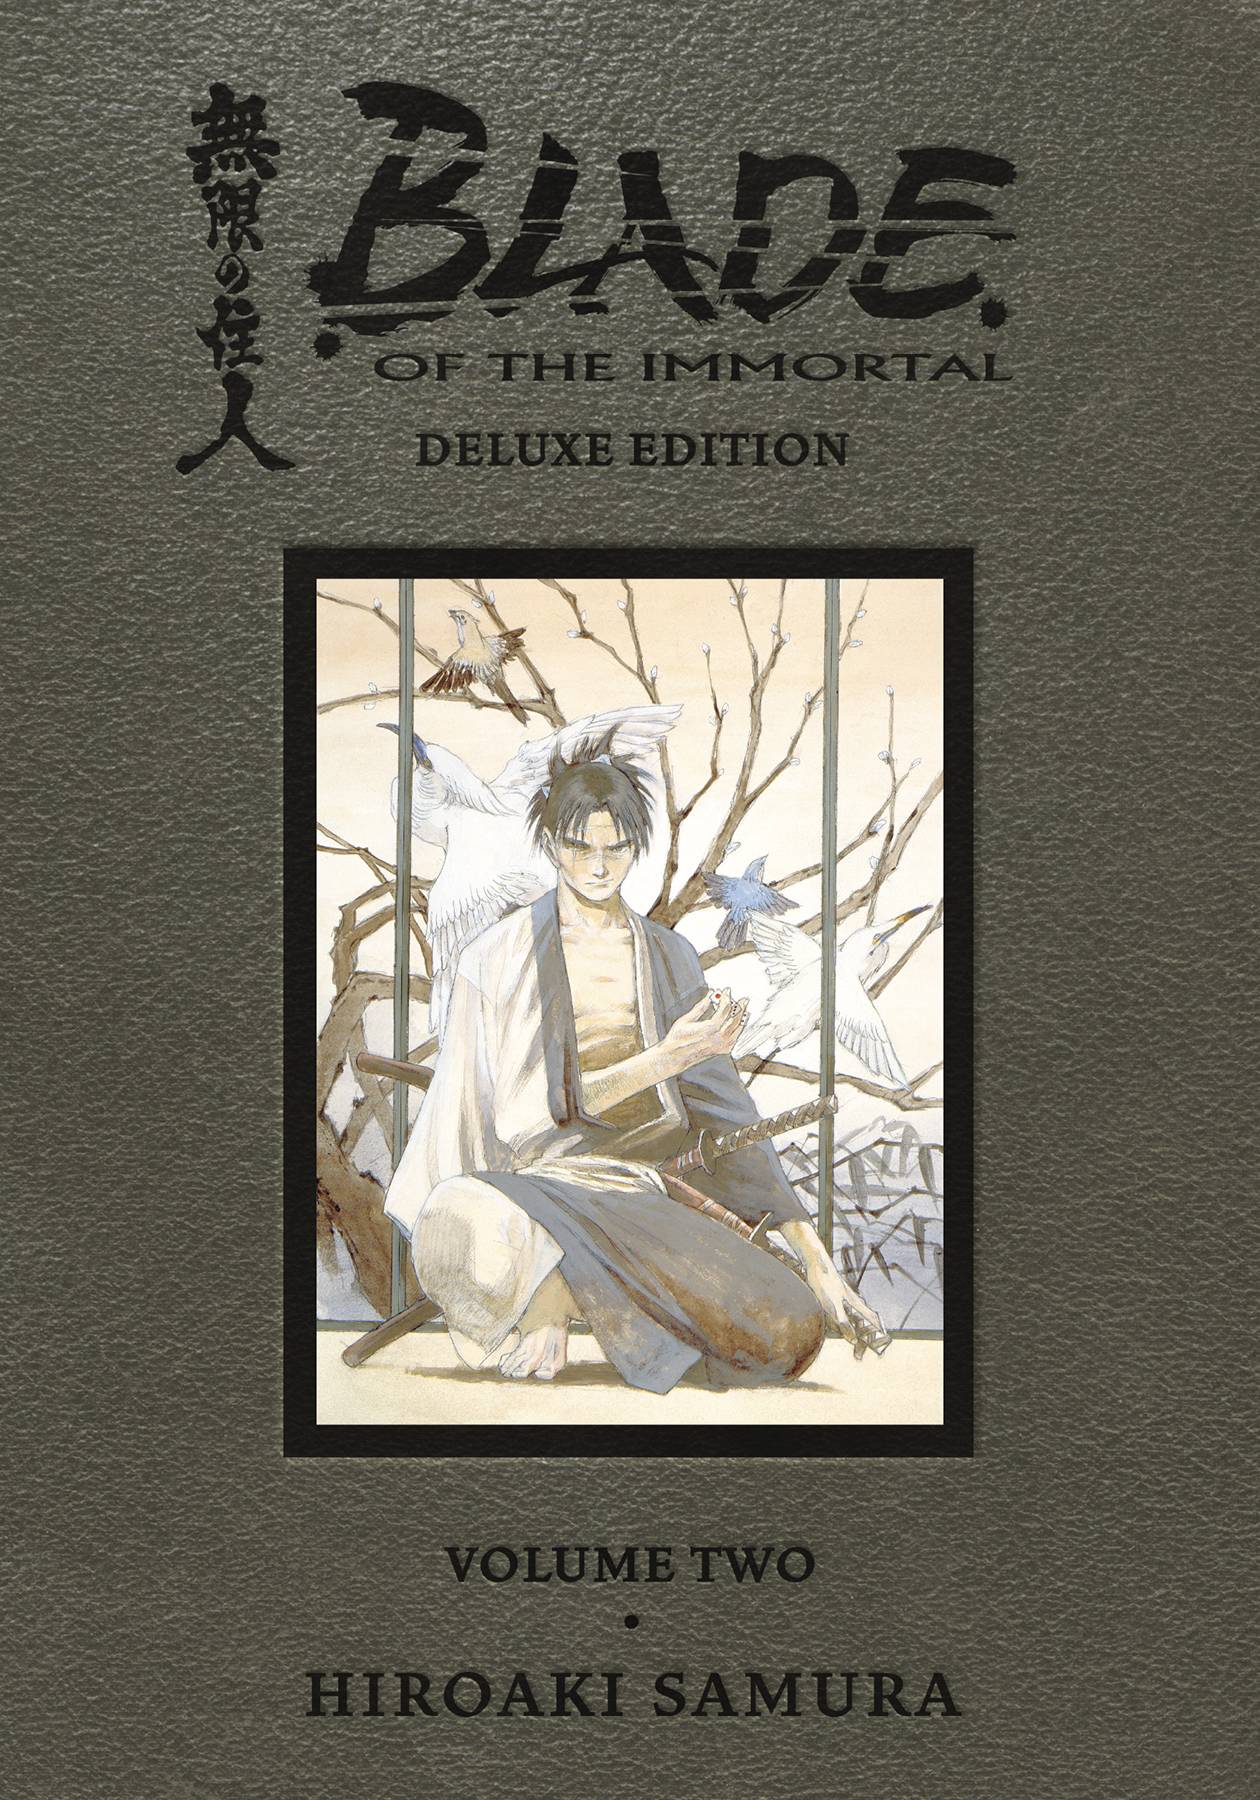 Blade Of Immortal Deluxe Edition Hardcover Vol. 2